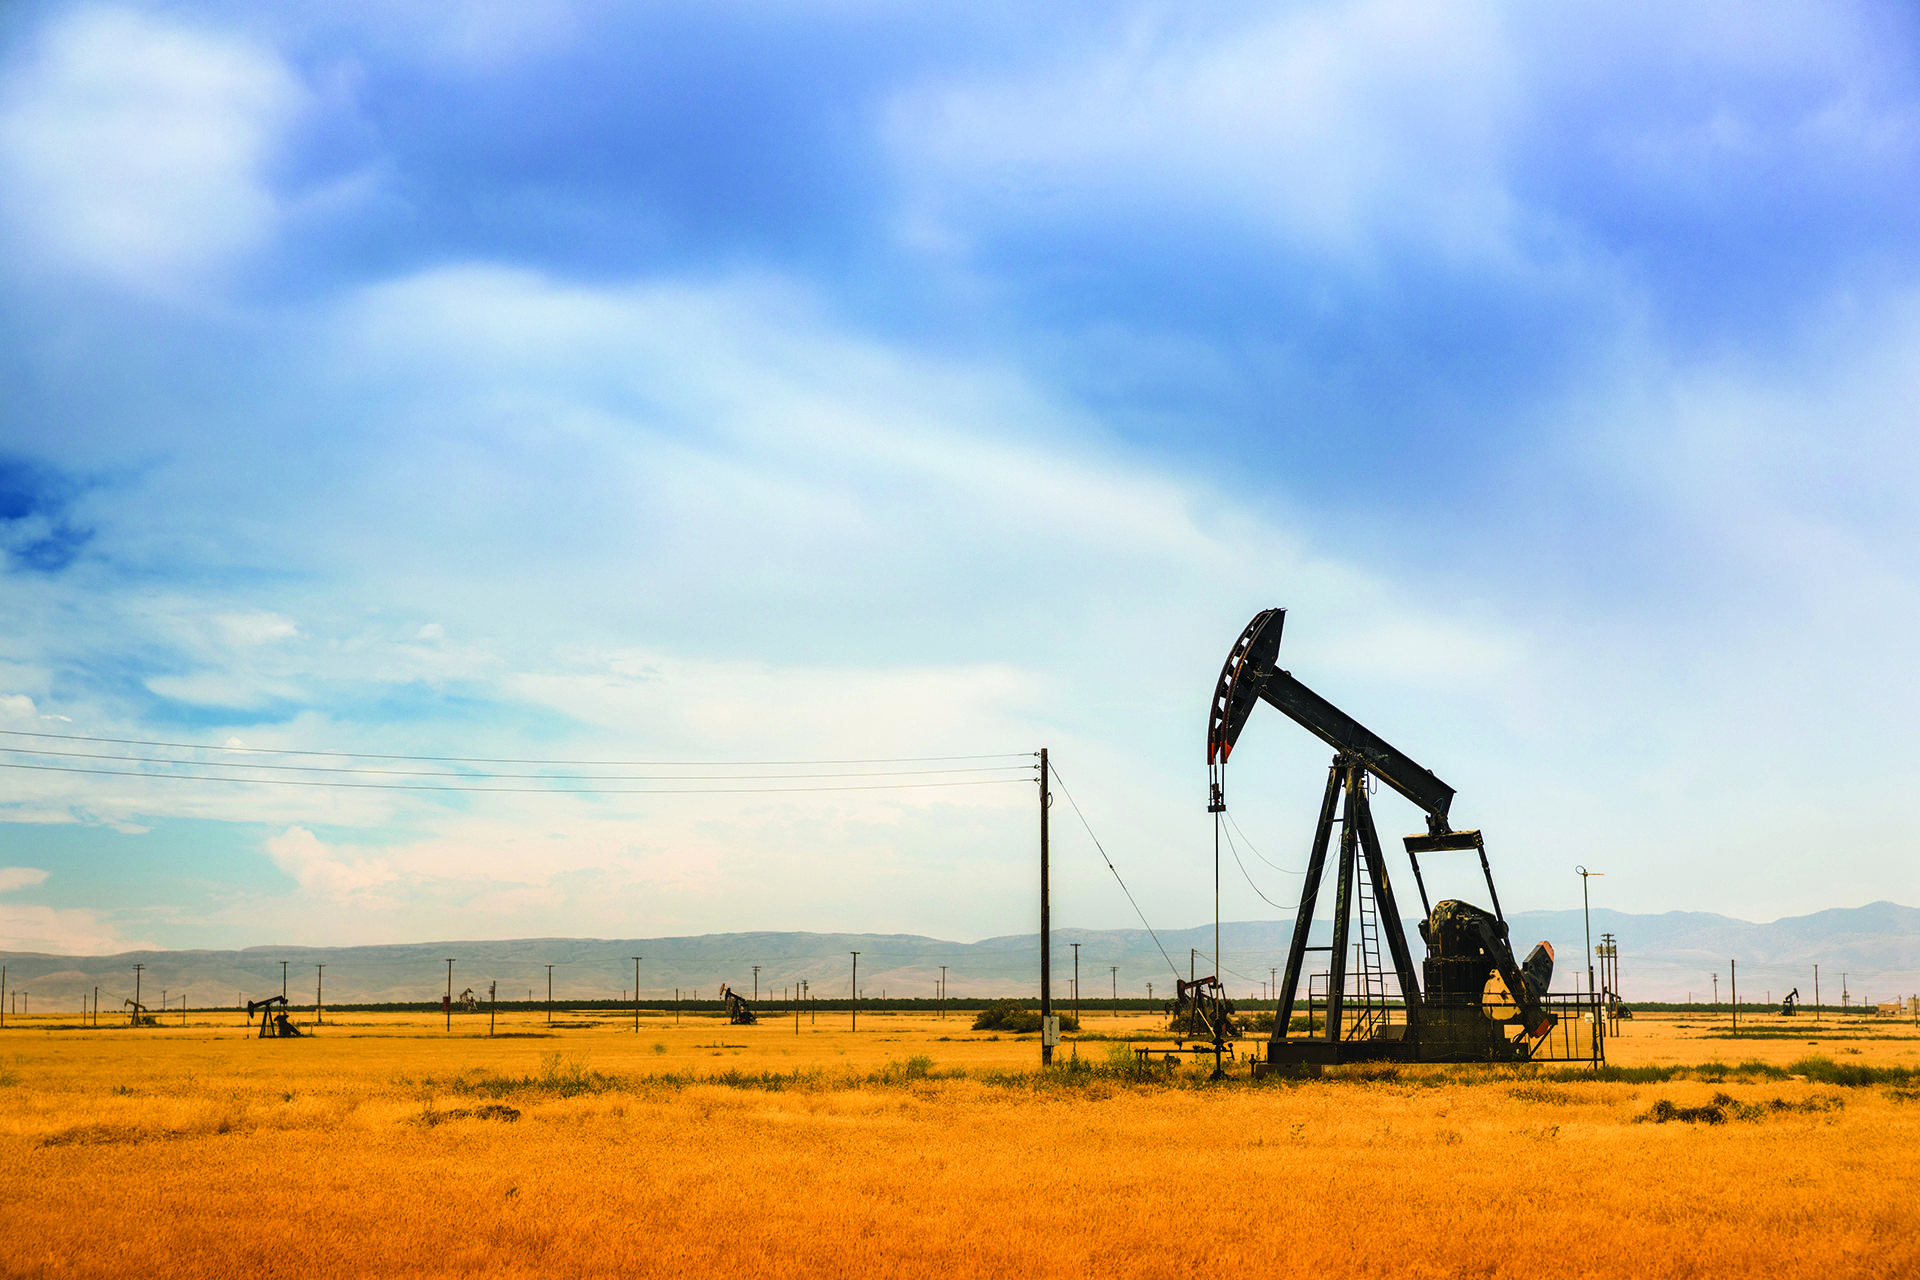 Pumpjack lifts oil from a well